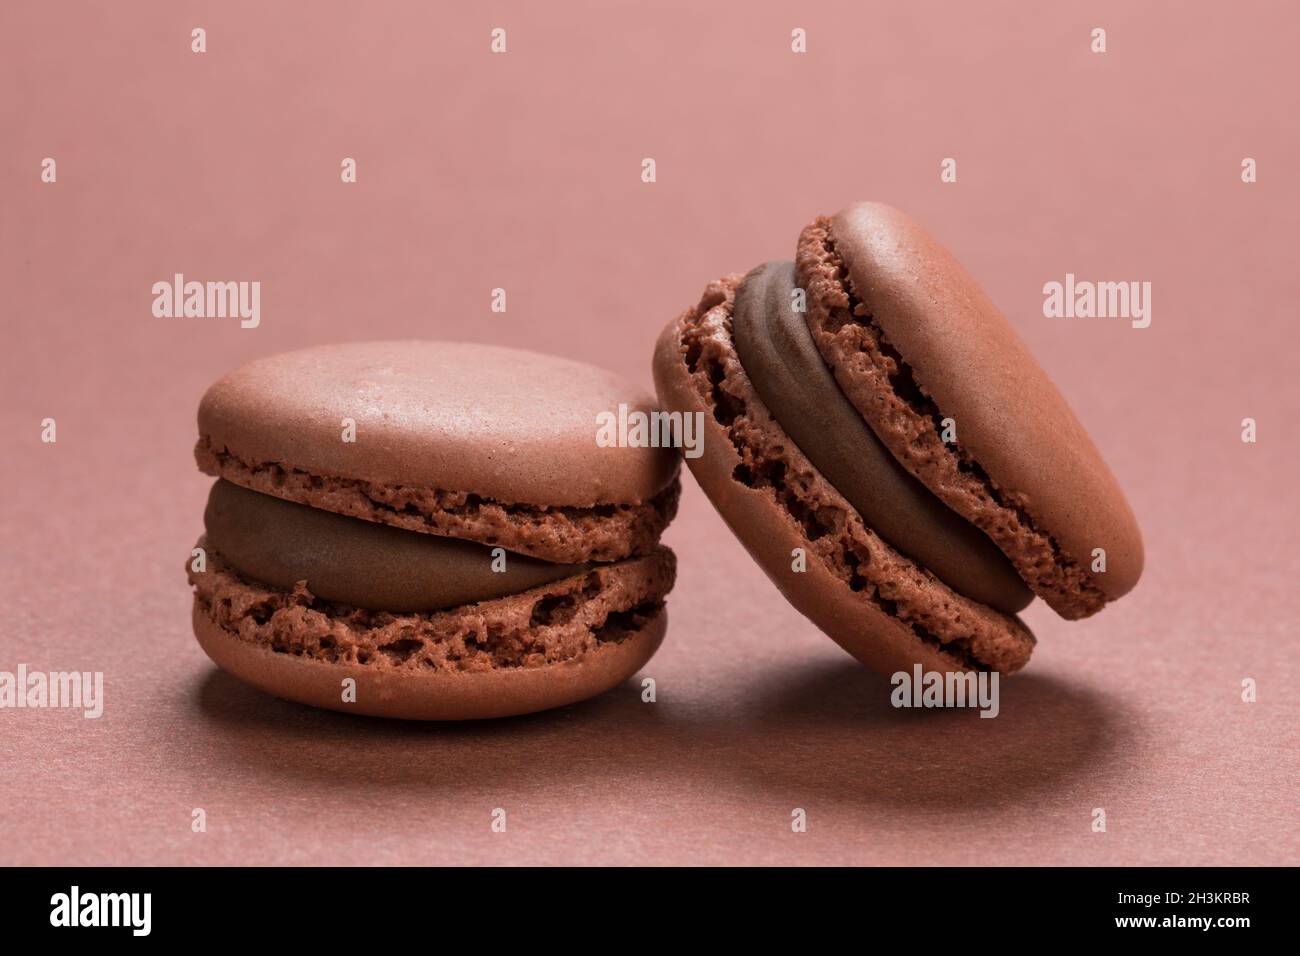 Chocolate flavor French macaron cookies closeup on background of a similar brown colour Stock Photo